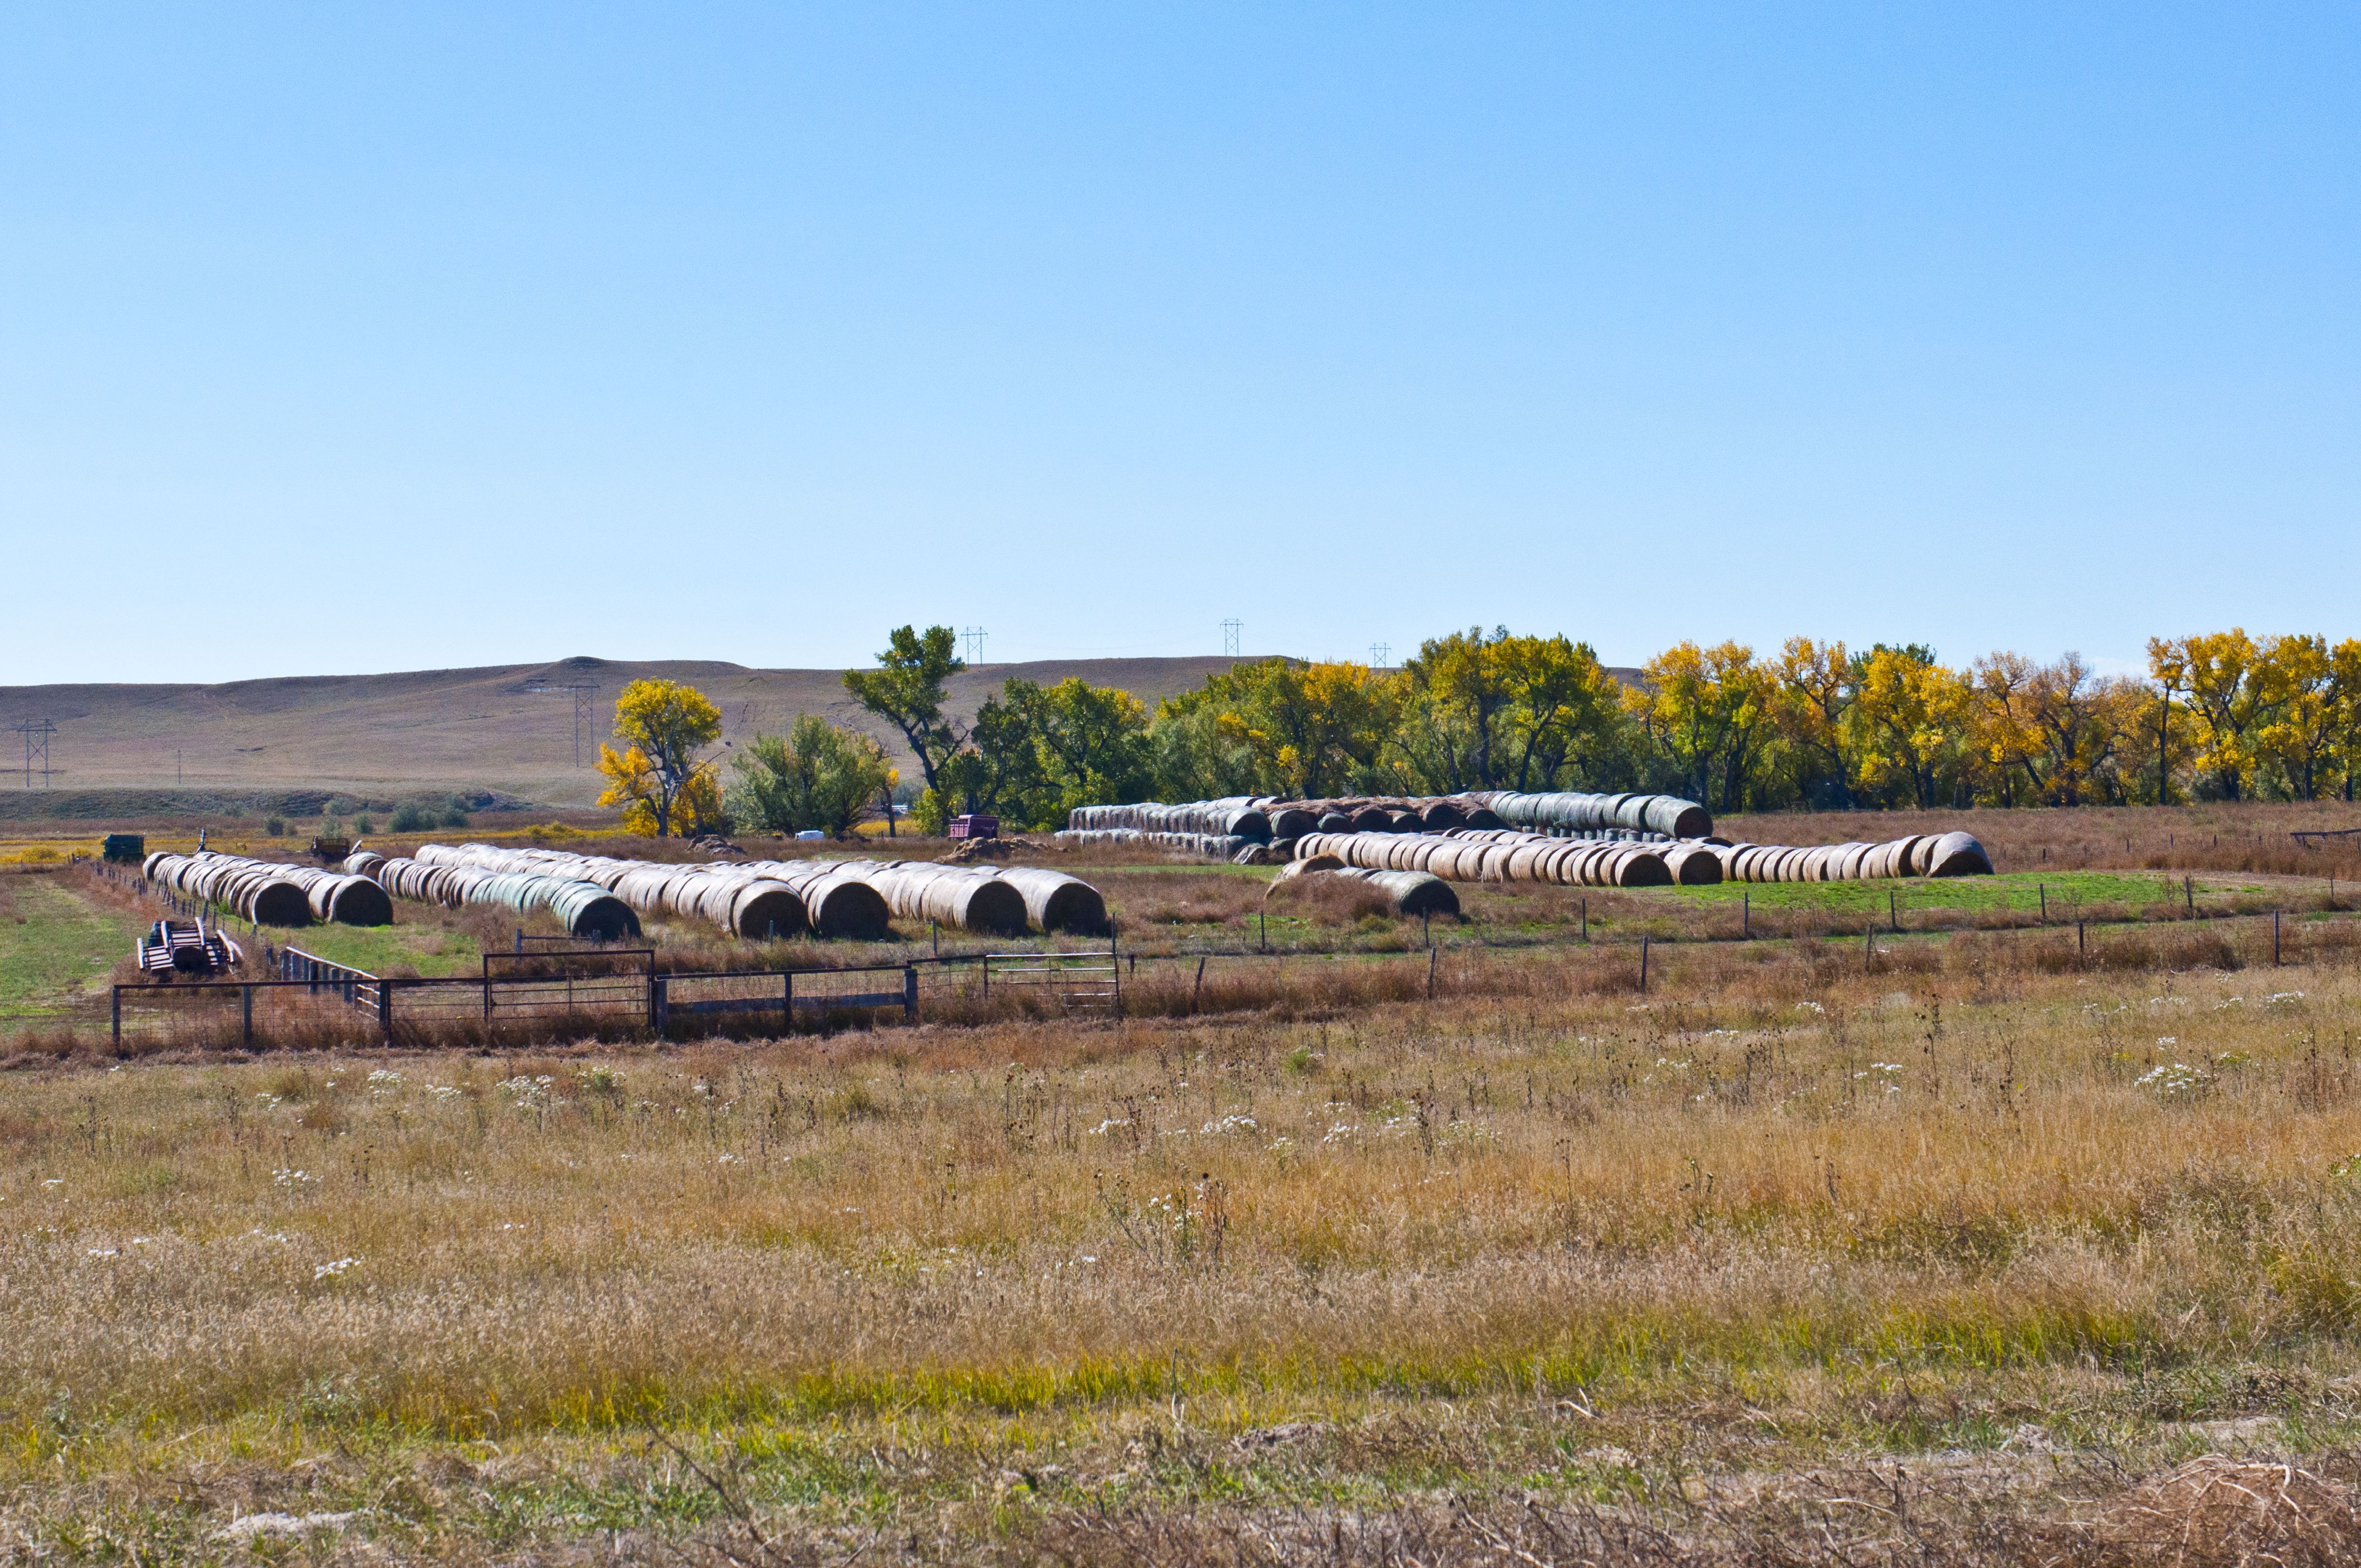 Nebraska, Crawford, Rolled and Stacked Bales of Hay